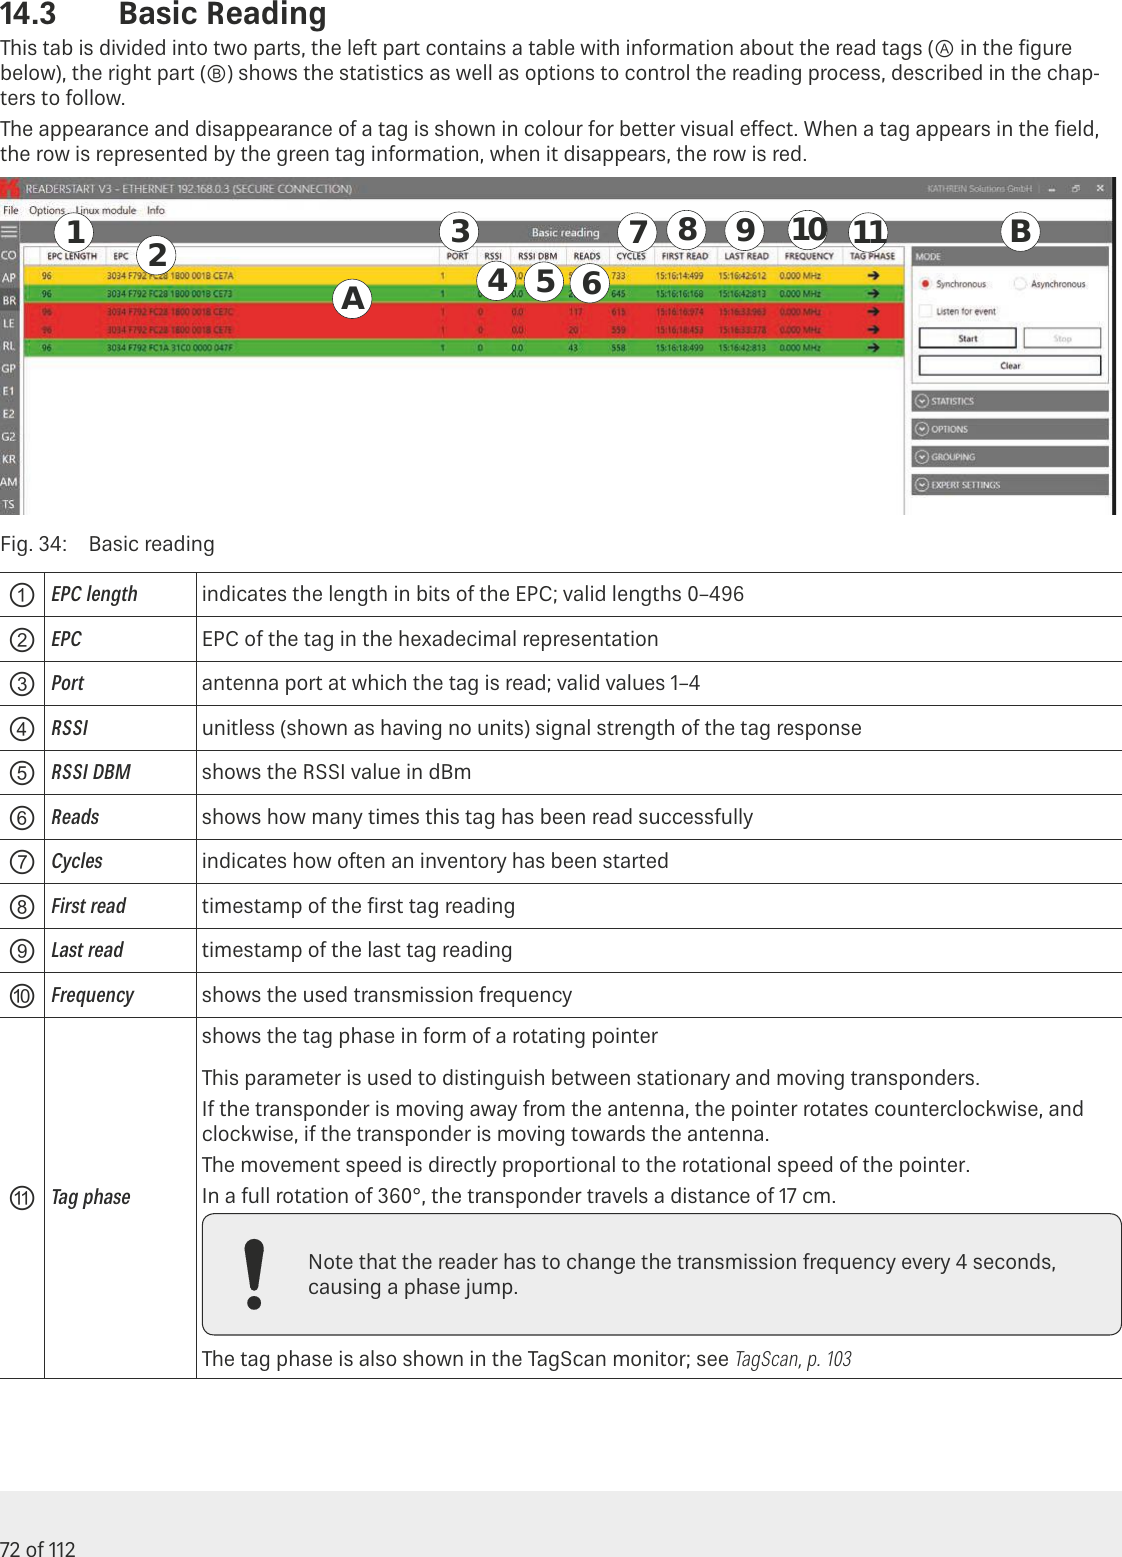 72 of 112Operating the Reader Using the ReaderStart Software14.3  Basic ReadingThis tab is divided into two parts, the left part contains a table with information about the read tags (Ⓐ in the ﬁgure below), the right part (Ⓑ) shows the statistics as well as options to control the reading process, described in the chap-ters to follow.The appearance and disappearance of a tag is shown in colour for better visual eect. When a tag appears in the ﬁeld, the row is represented by the green tag information, when it disappears, the row is red.A23145678910 11 BFig. 34:  Basic reading①EPC lengthindicates the length in bits of the EPC; valid lengths 0–496②EPCEPC of the tag in the hexadecimal representation③Portantenna port at which the tag is read; valid values 1–4④RSSIunitless (shown as having no units) signal strength of the tag response⑤RSSI DBMshows the RSSI value in dBm⑥Readsshows how many times this tag has been read successfully⑦Cyclesindicates how often an inventory has been started⑧First readtimestamp of the ﬁrst tag reading⑨Last readtimestamp of the last tag reading ⑩Frequencyshows the used transmission frequency⑪Tag phaseshows the tag phase in form of a rotating pointerThis parameter is used to distinguish between stationary and moving transponders.If the transponder is moving away from the antenna, the pointer rotates counterclockwise, and clockwise, if the transponder is moving towards the antenna.The movement speed is directly proportional to the rotational speed of the pointer.In a full rotation of 360°, the transponder travels a distance of 17cm.Note that the reader has to change the transmission frequency every 4 seconds, causing a phase jump.The tag phase is also shown in the TagScan monitor; see TagScan, p.103